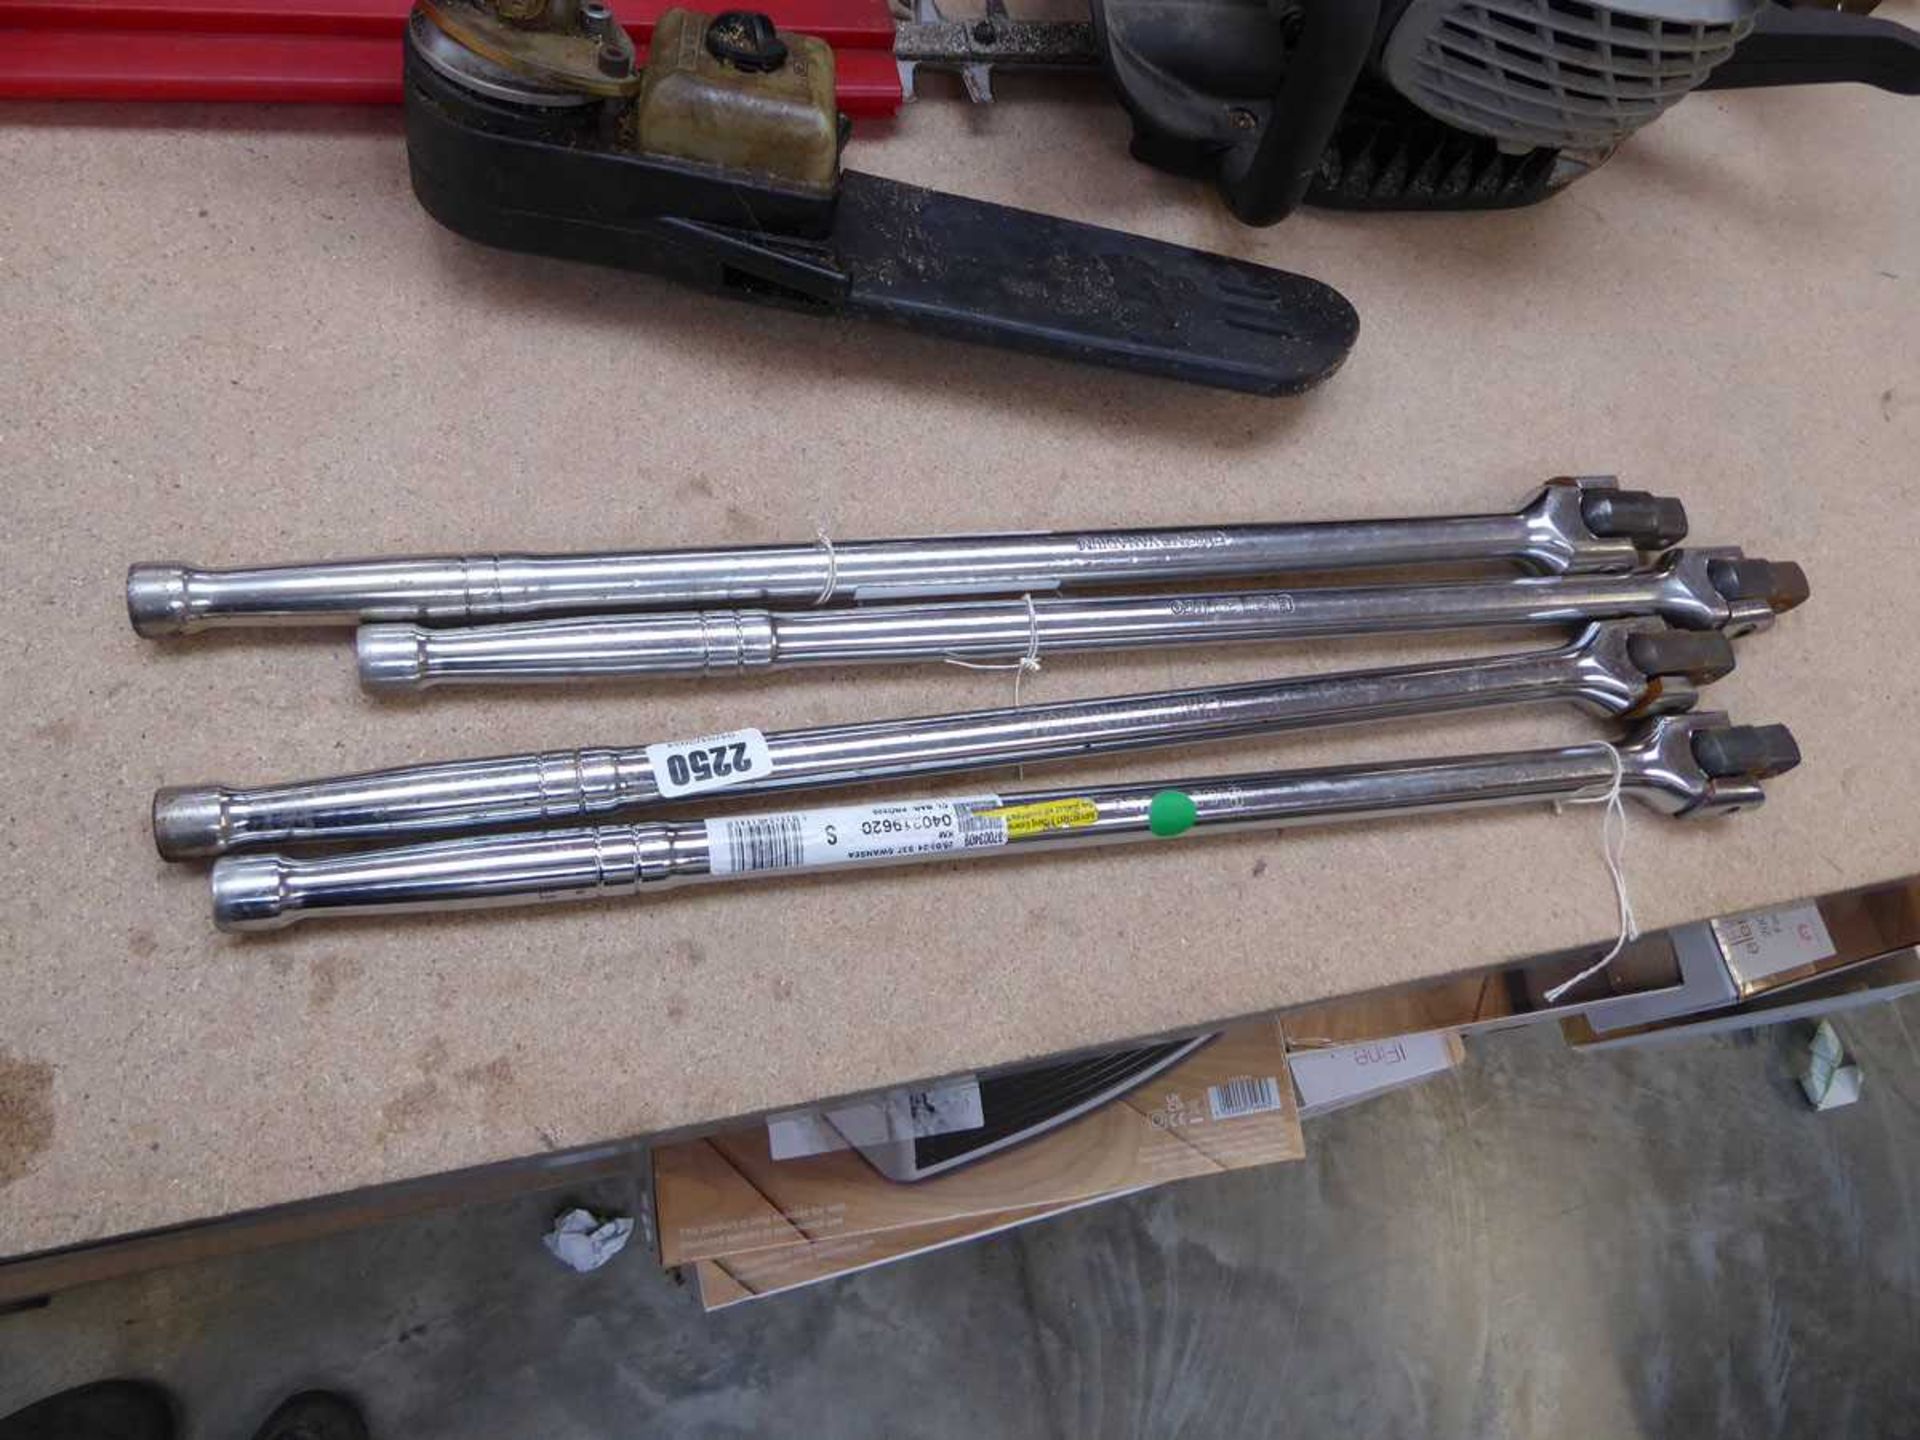 4 torque wrenches